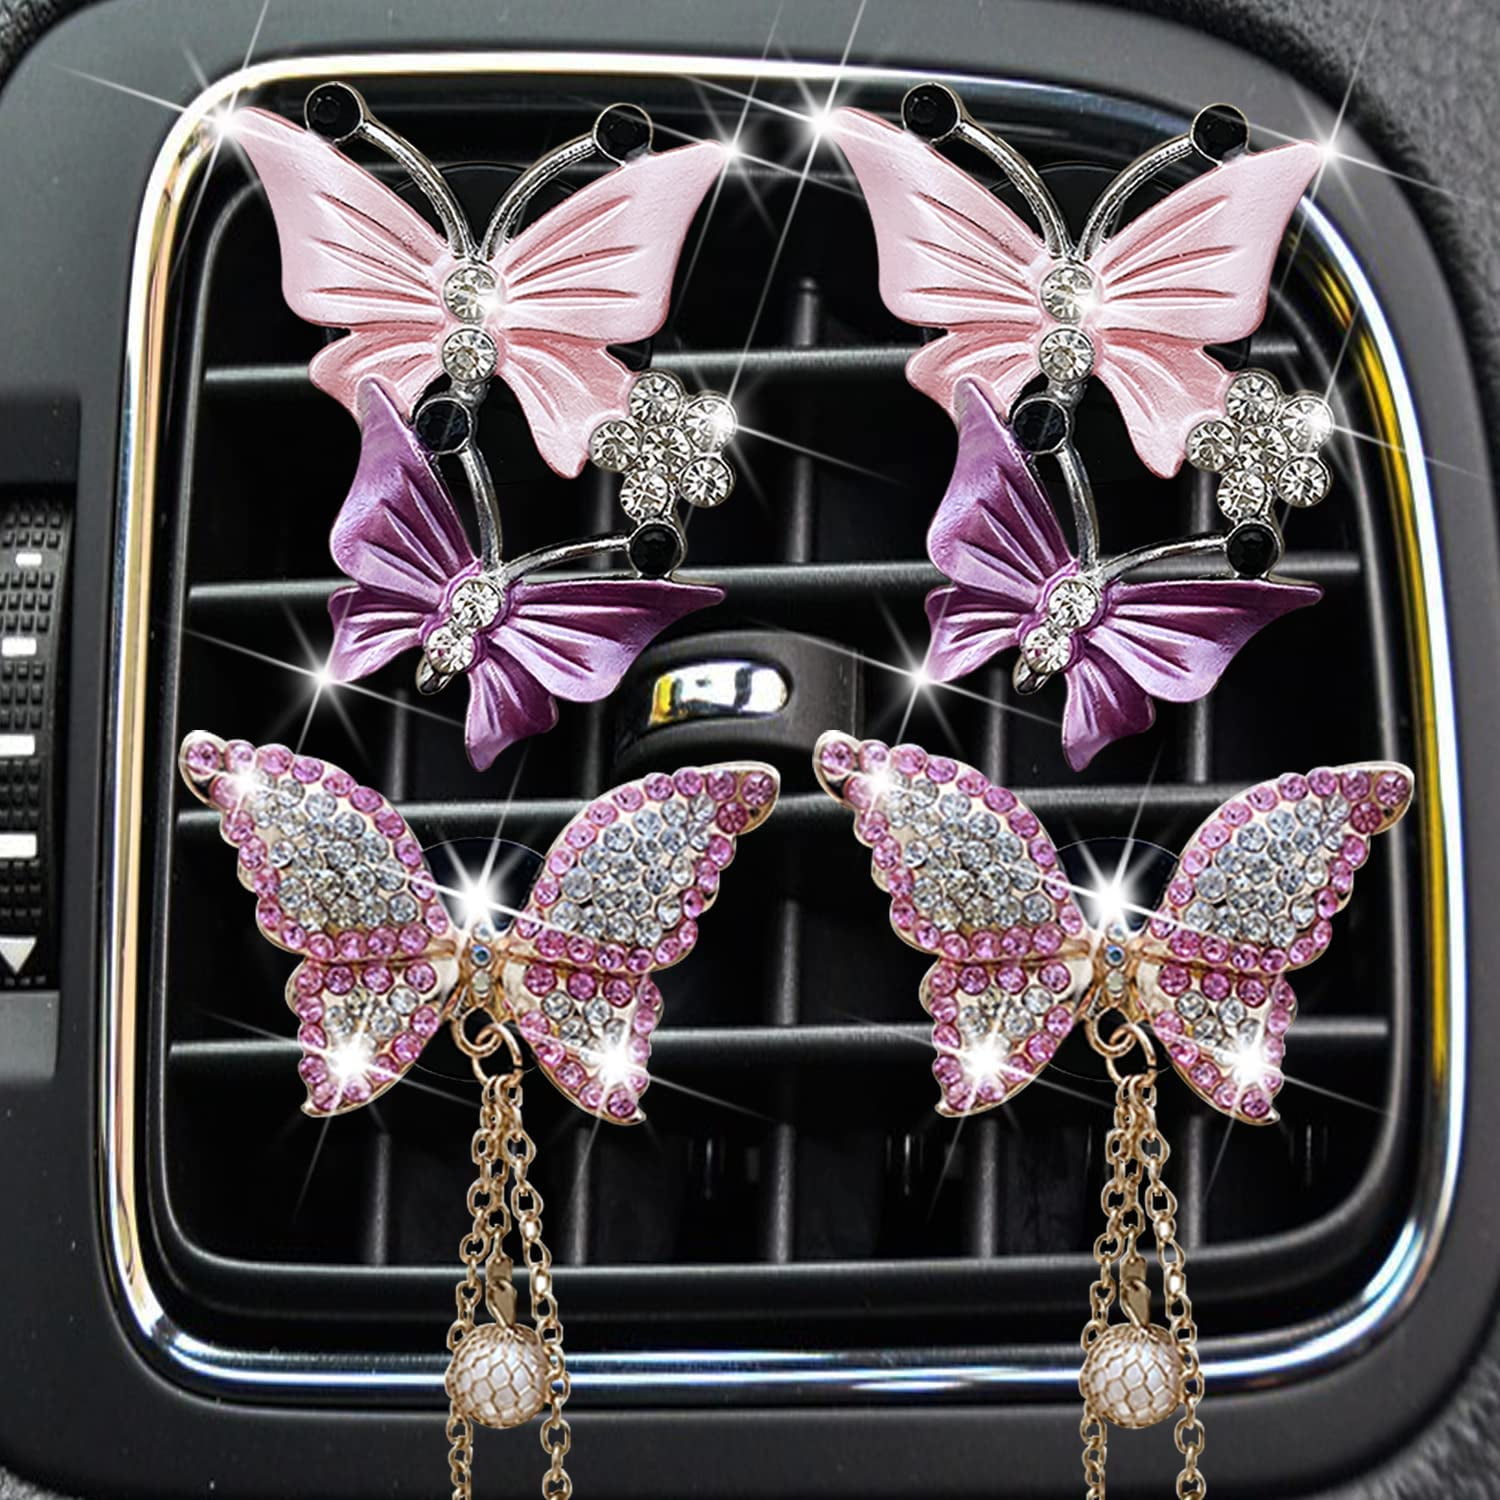 Joynaamn Bling Car Accessories for Women, Car Freshener Vent Clip with 2  Refill Pads, Cute Blue Butterfly Accessories/Décor for Car Interior Home